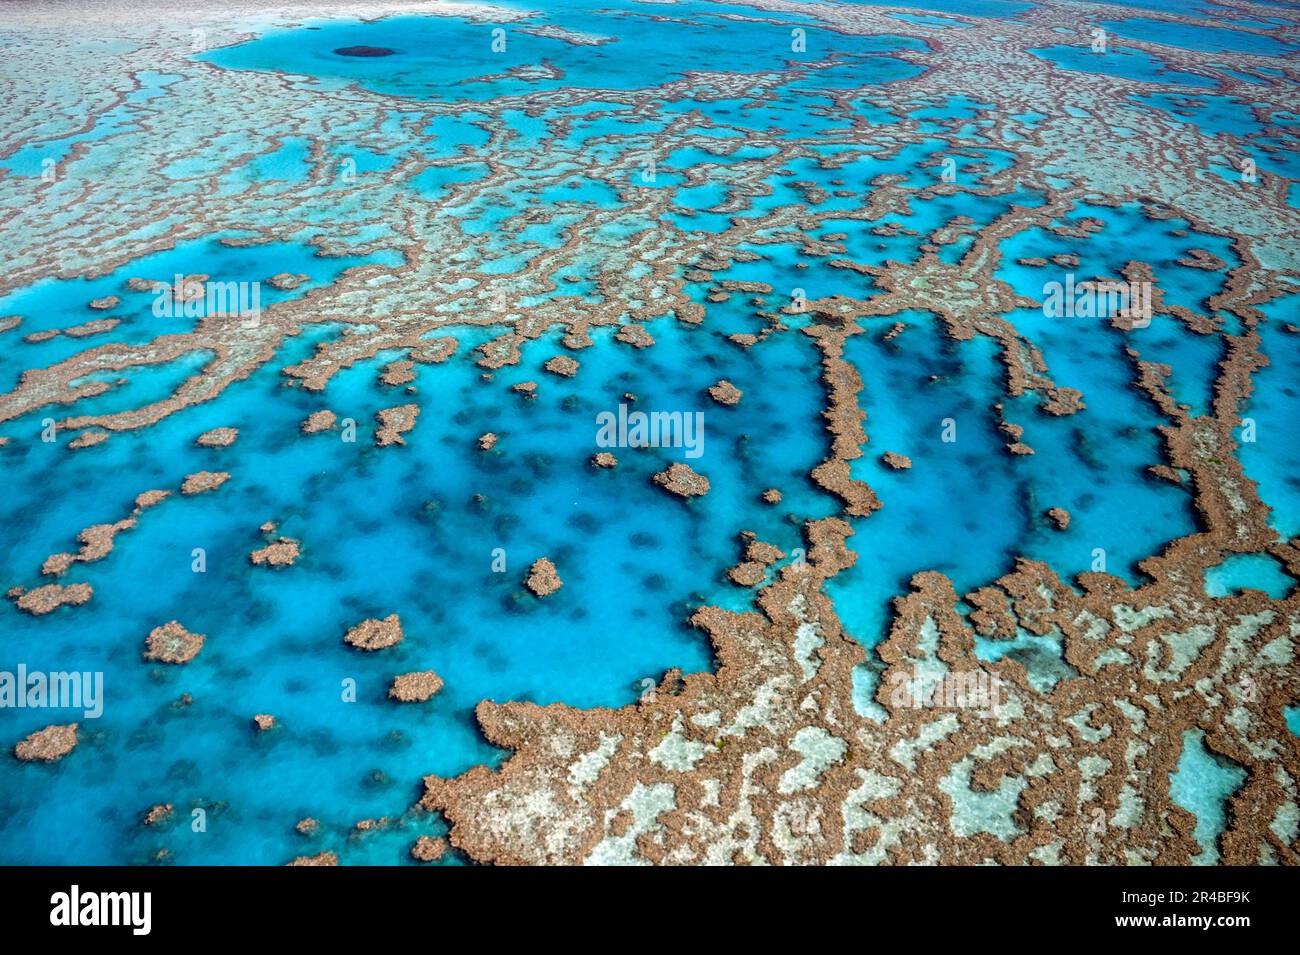 Reefs and Atolls, Great Barrier Reef, Queensland, Australia Stock Photo ...